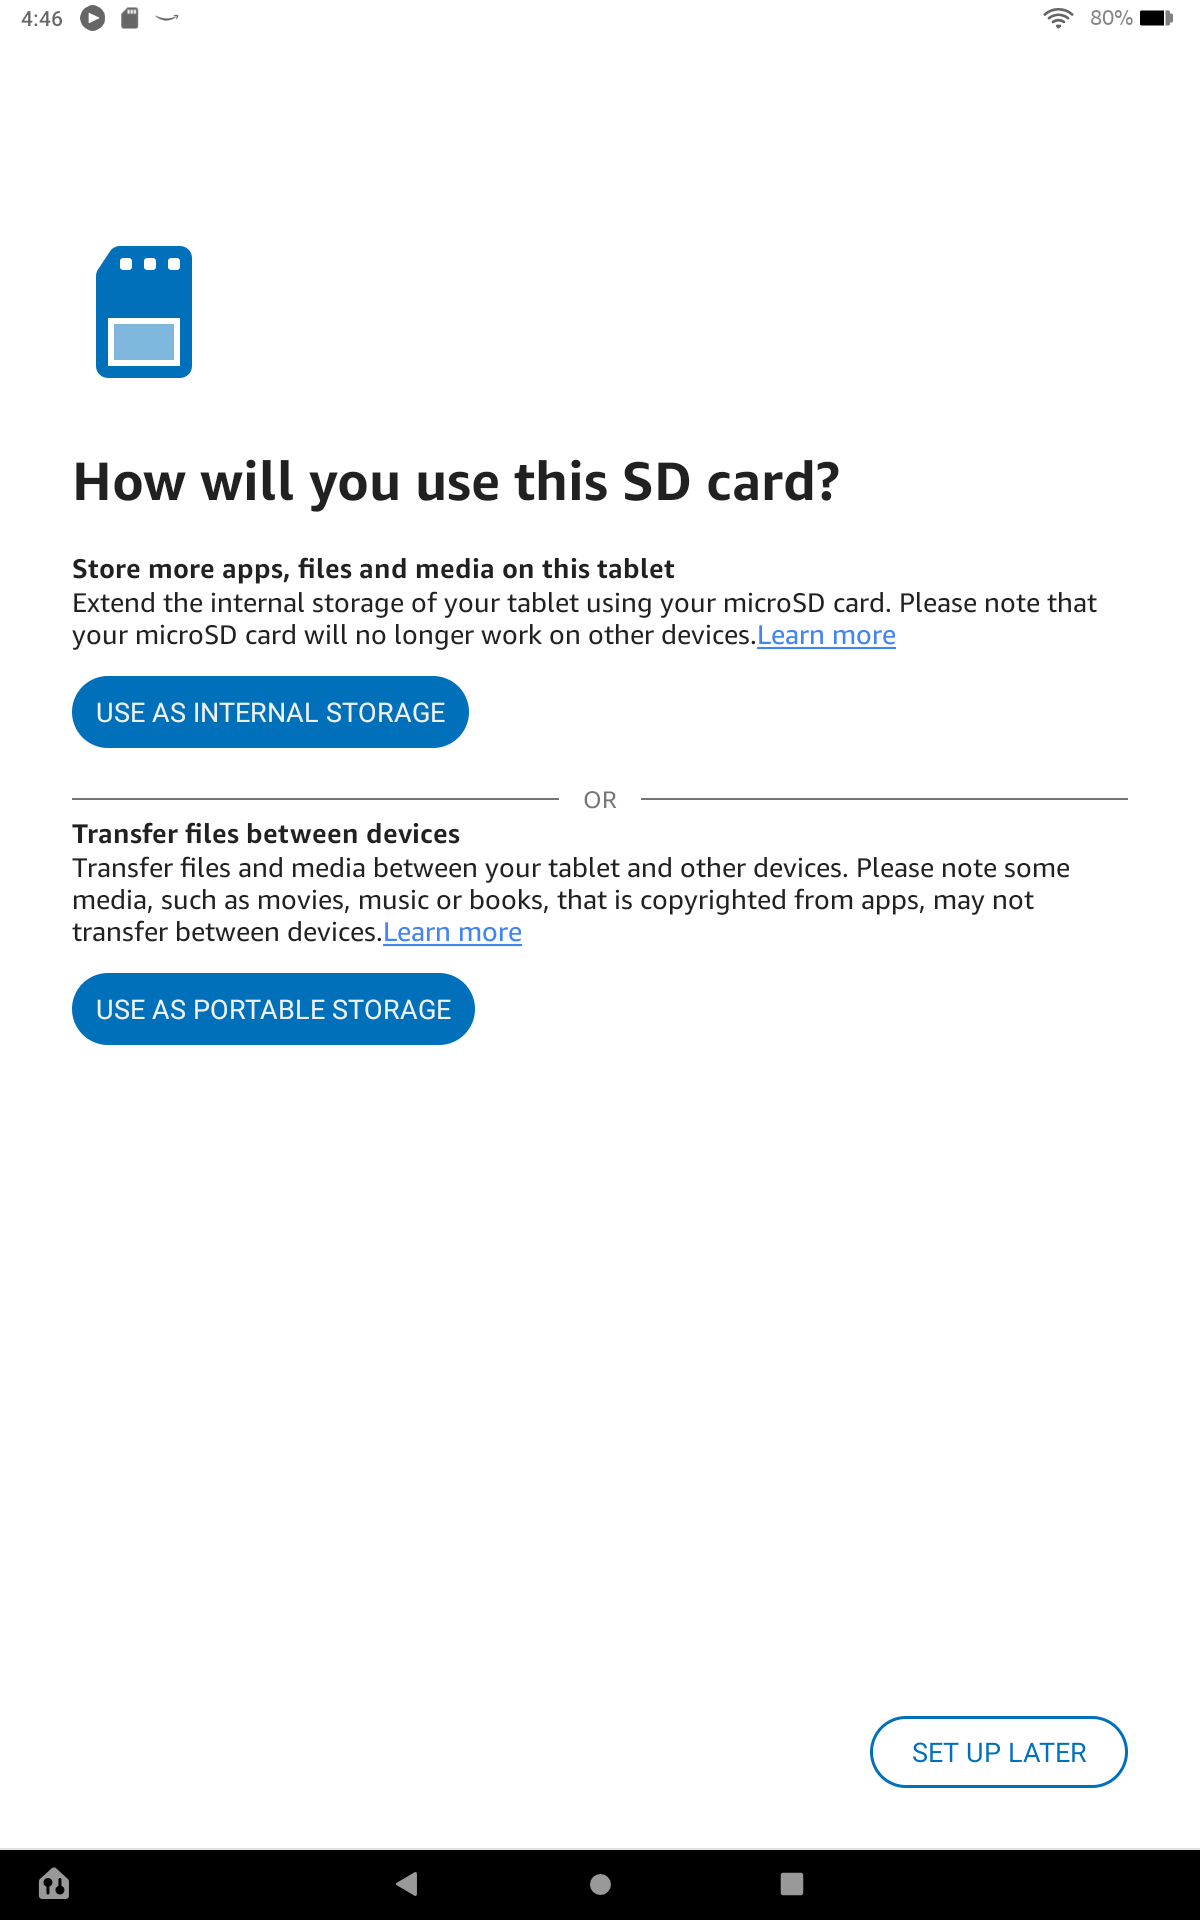 Amazon Fire screenshot asking the user how they'll use a newly-installed SD card.